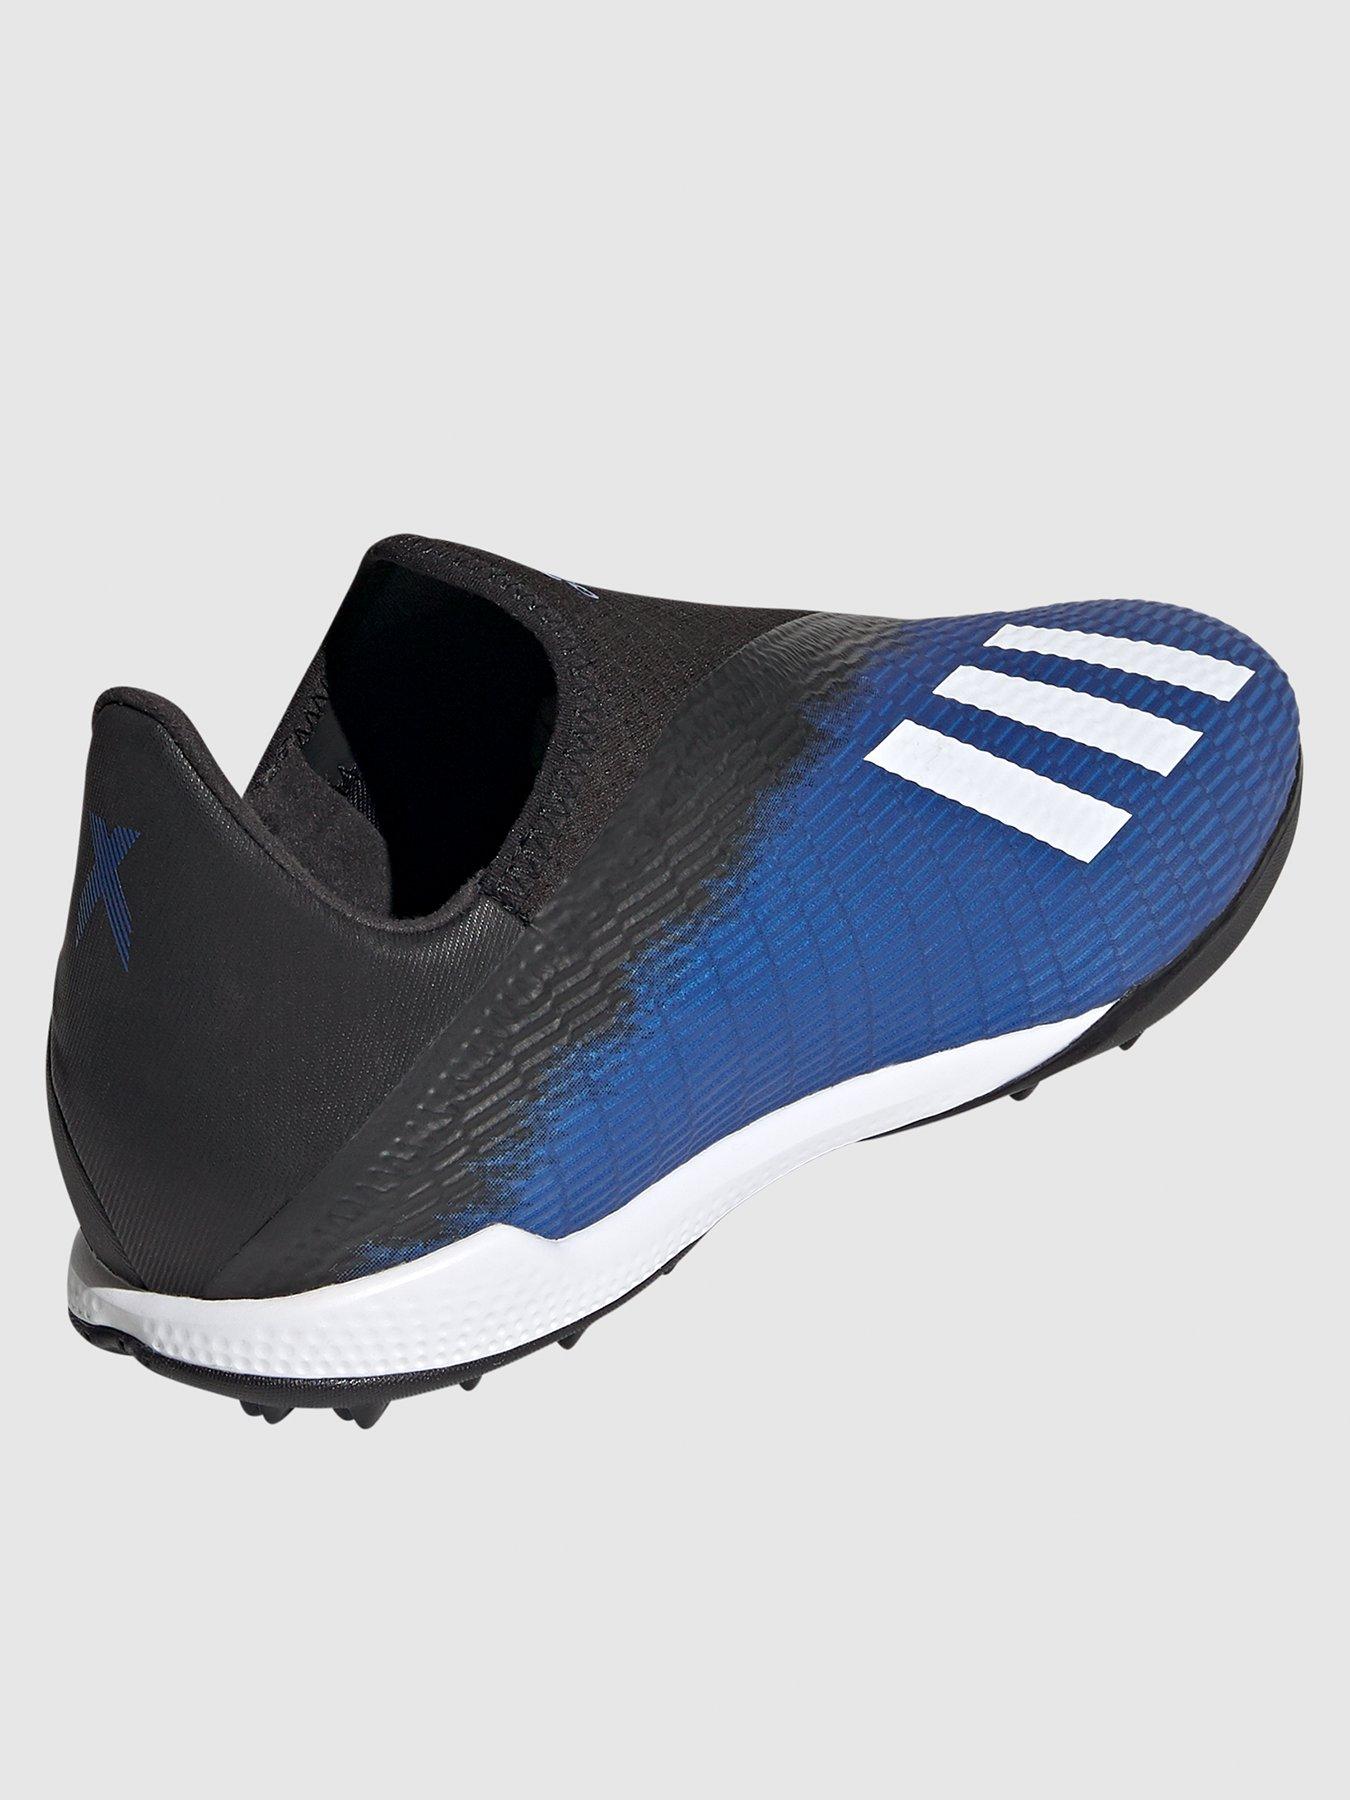 laceless astro football boots online -